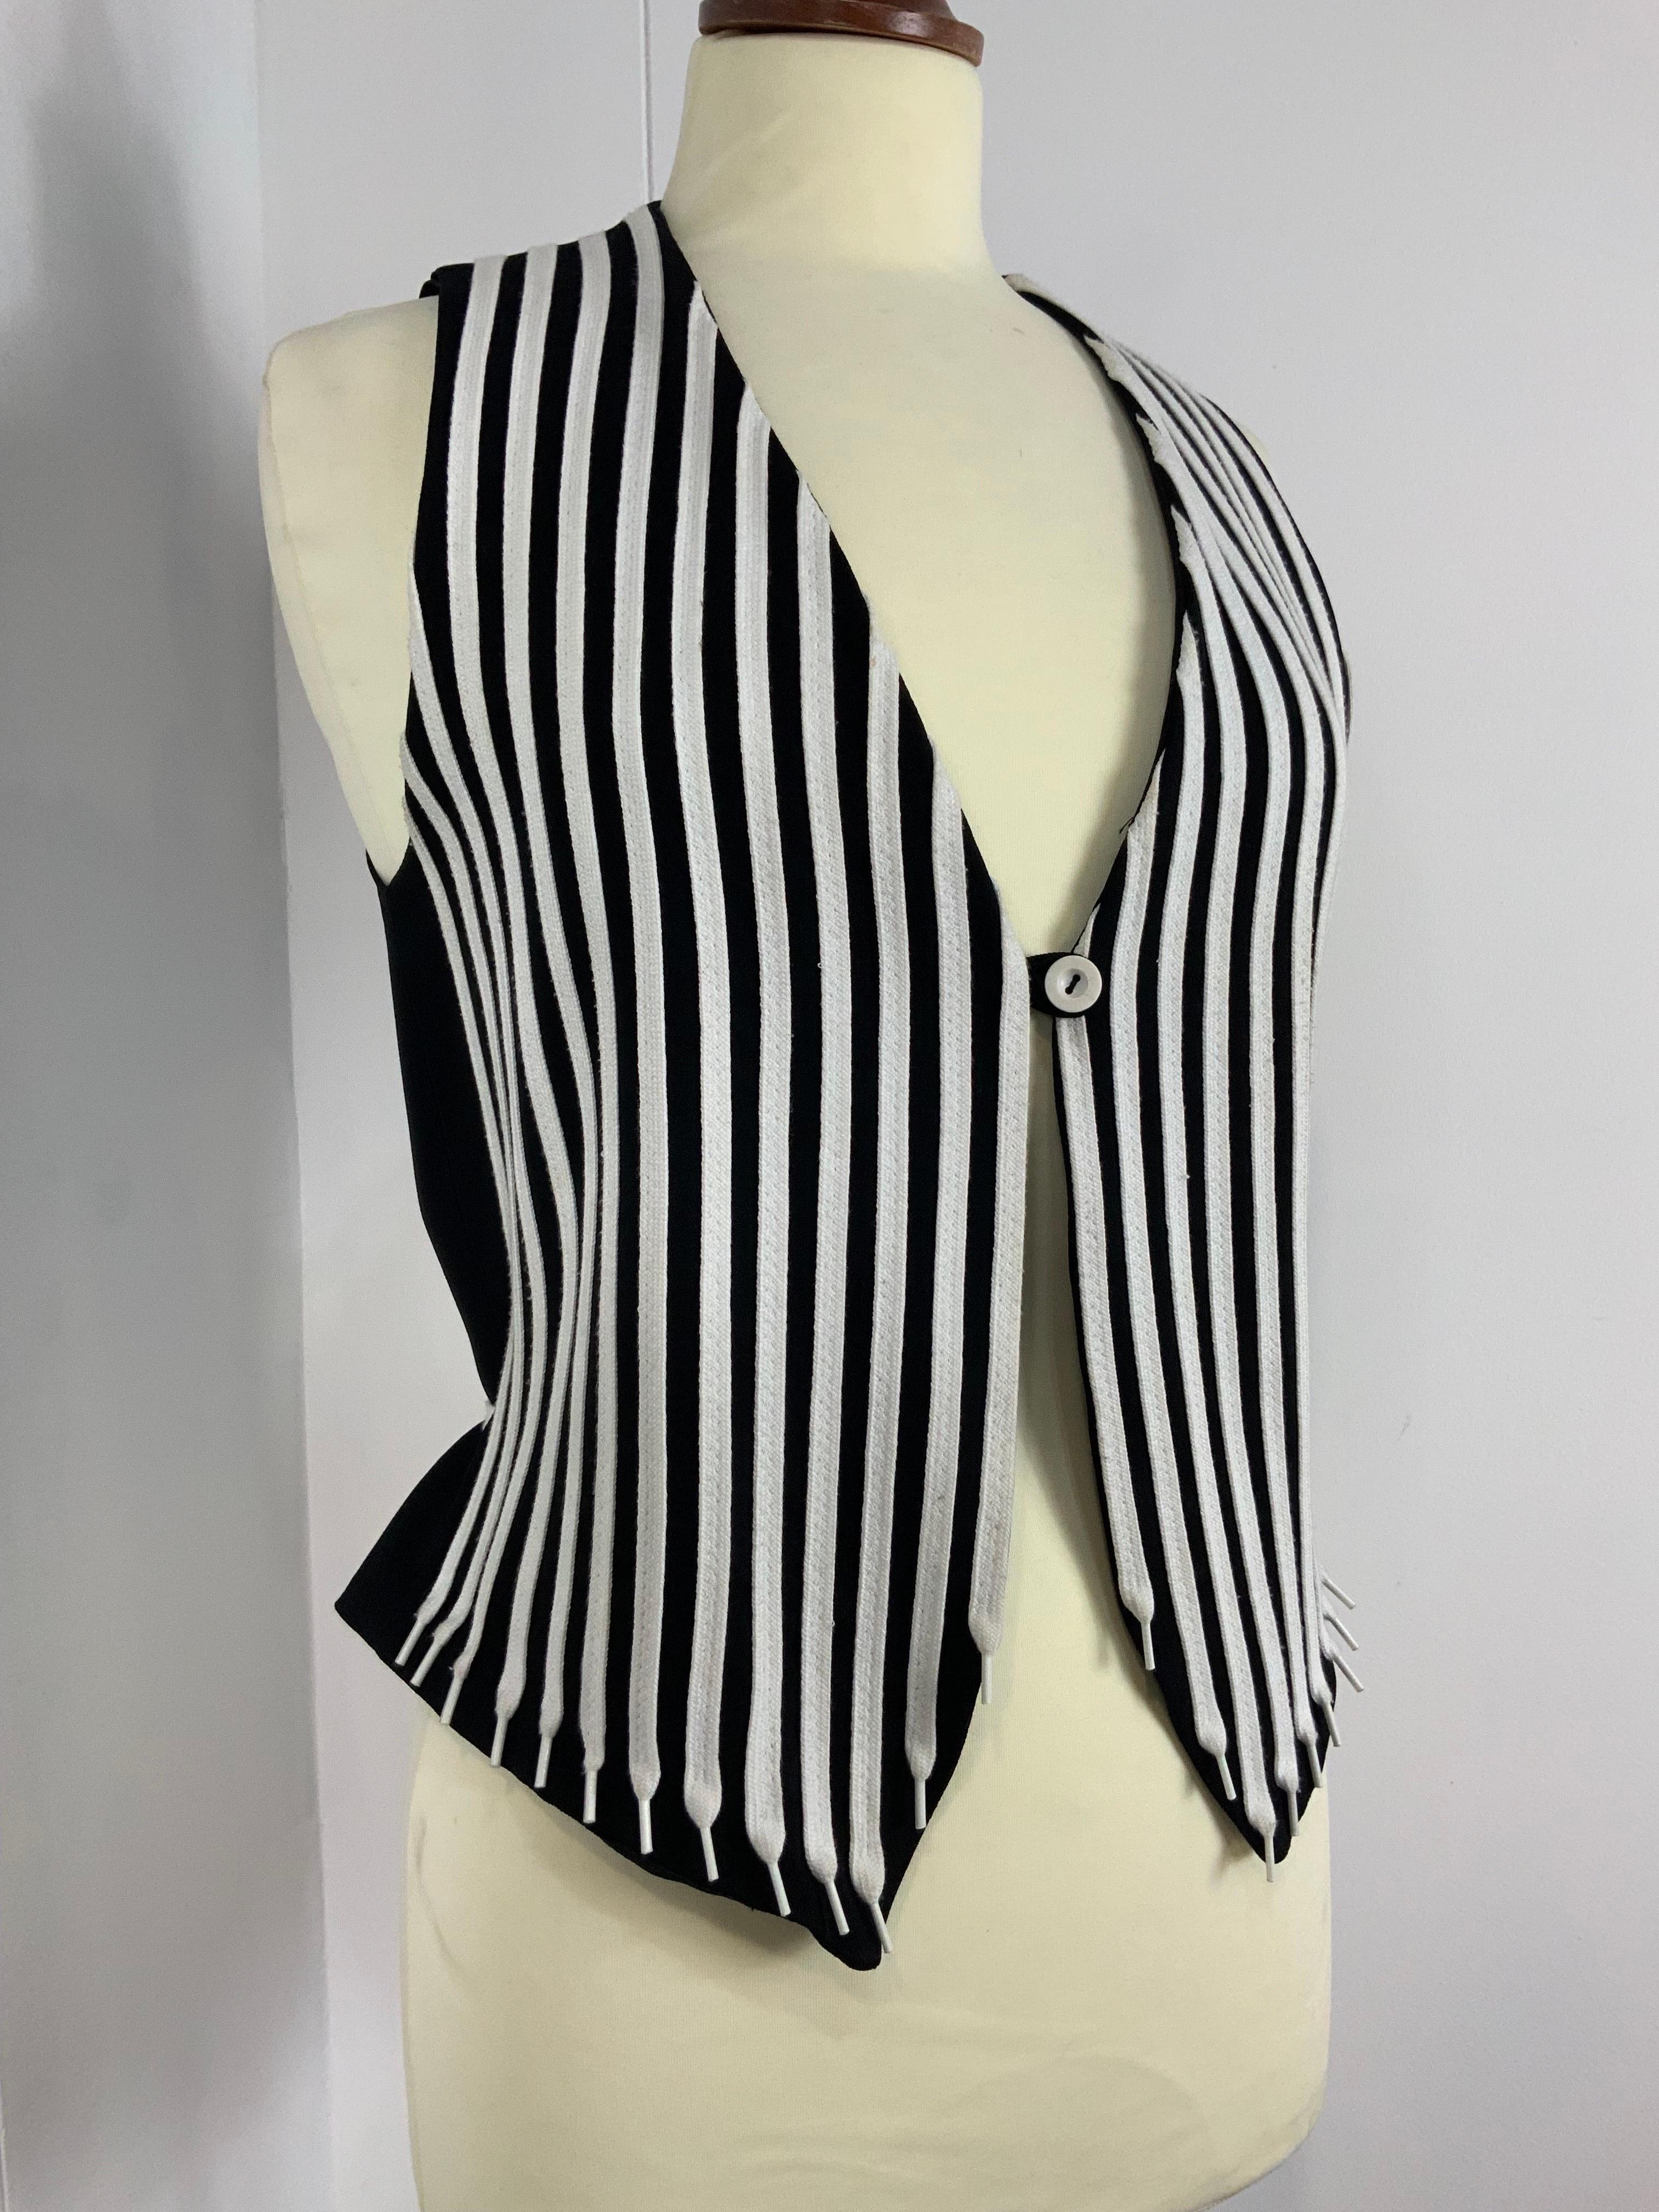 CHEAP AND CHIC BY MOSCHINO VEST.
Amazing vintage item.
In acetate and rayon.
Particular detail of strings.
Italian size 42.
Shoulders 27 cm
Bust 44 cm
Length 56 cm
In good general condition, it shows signs of normal use.